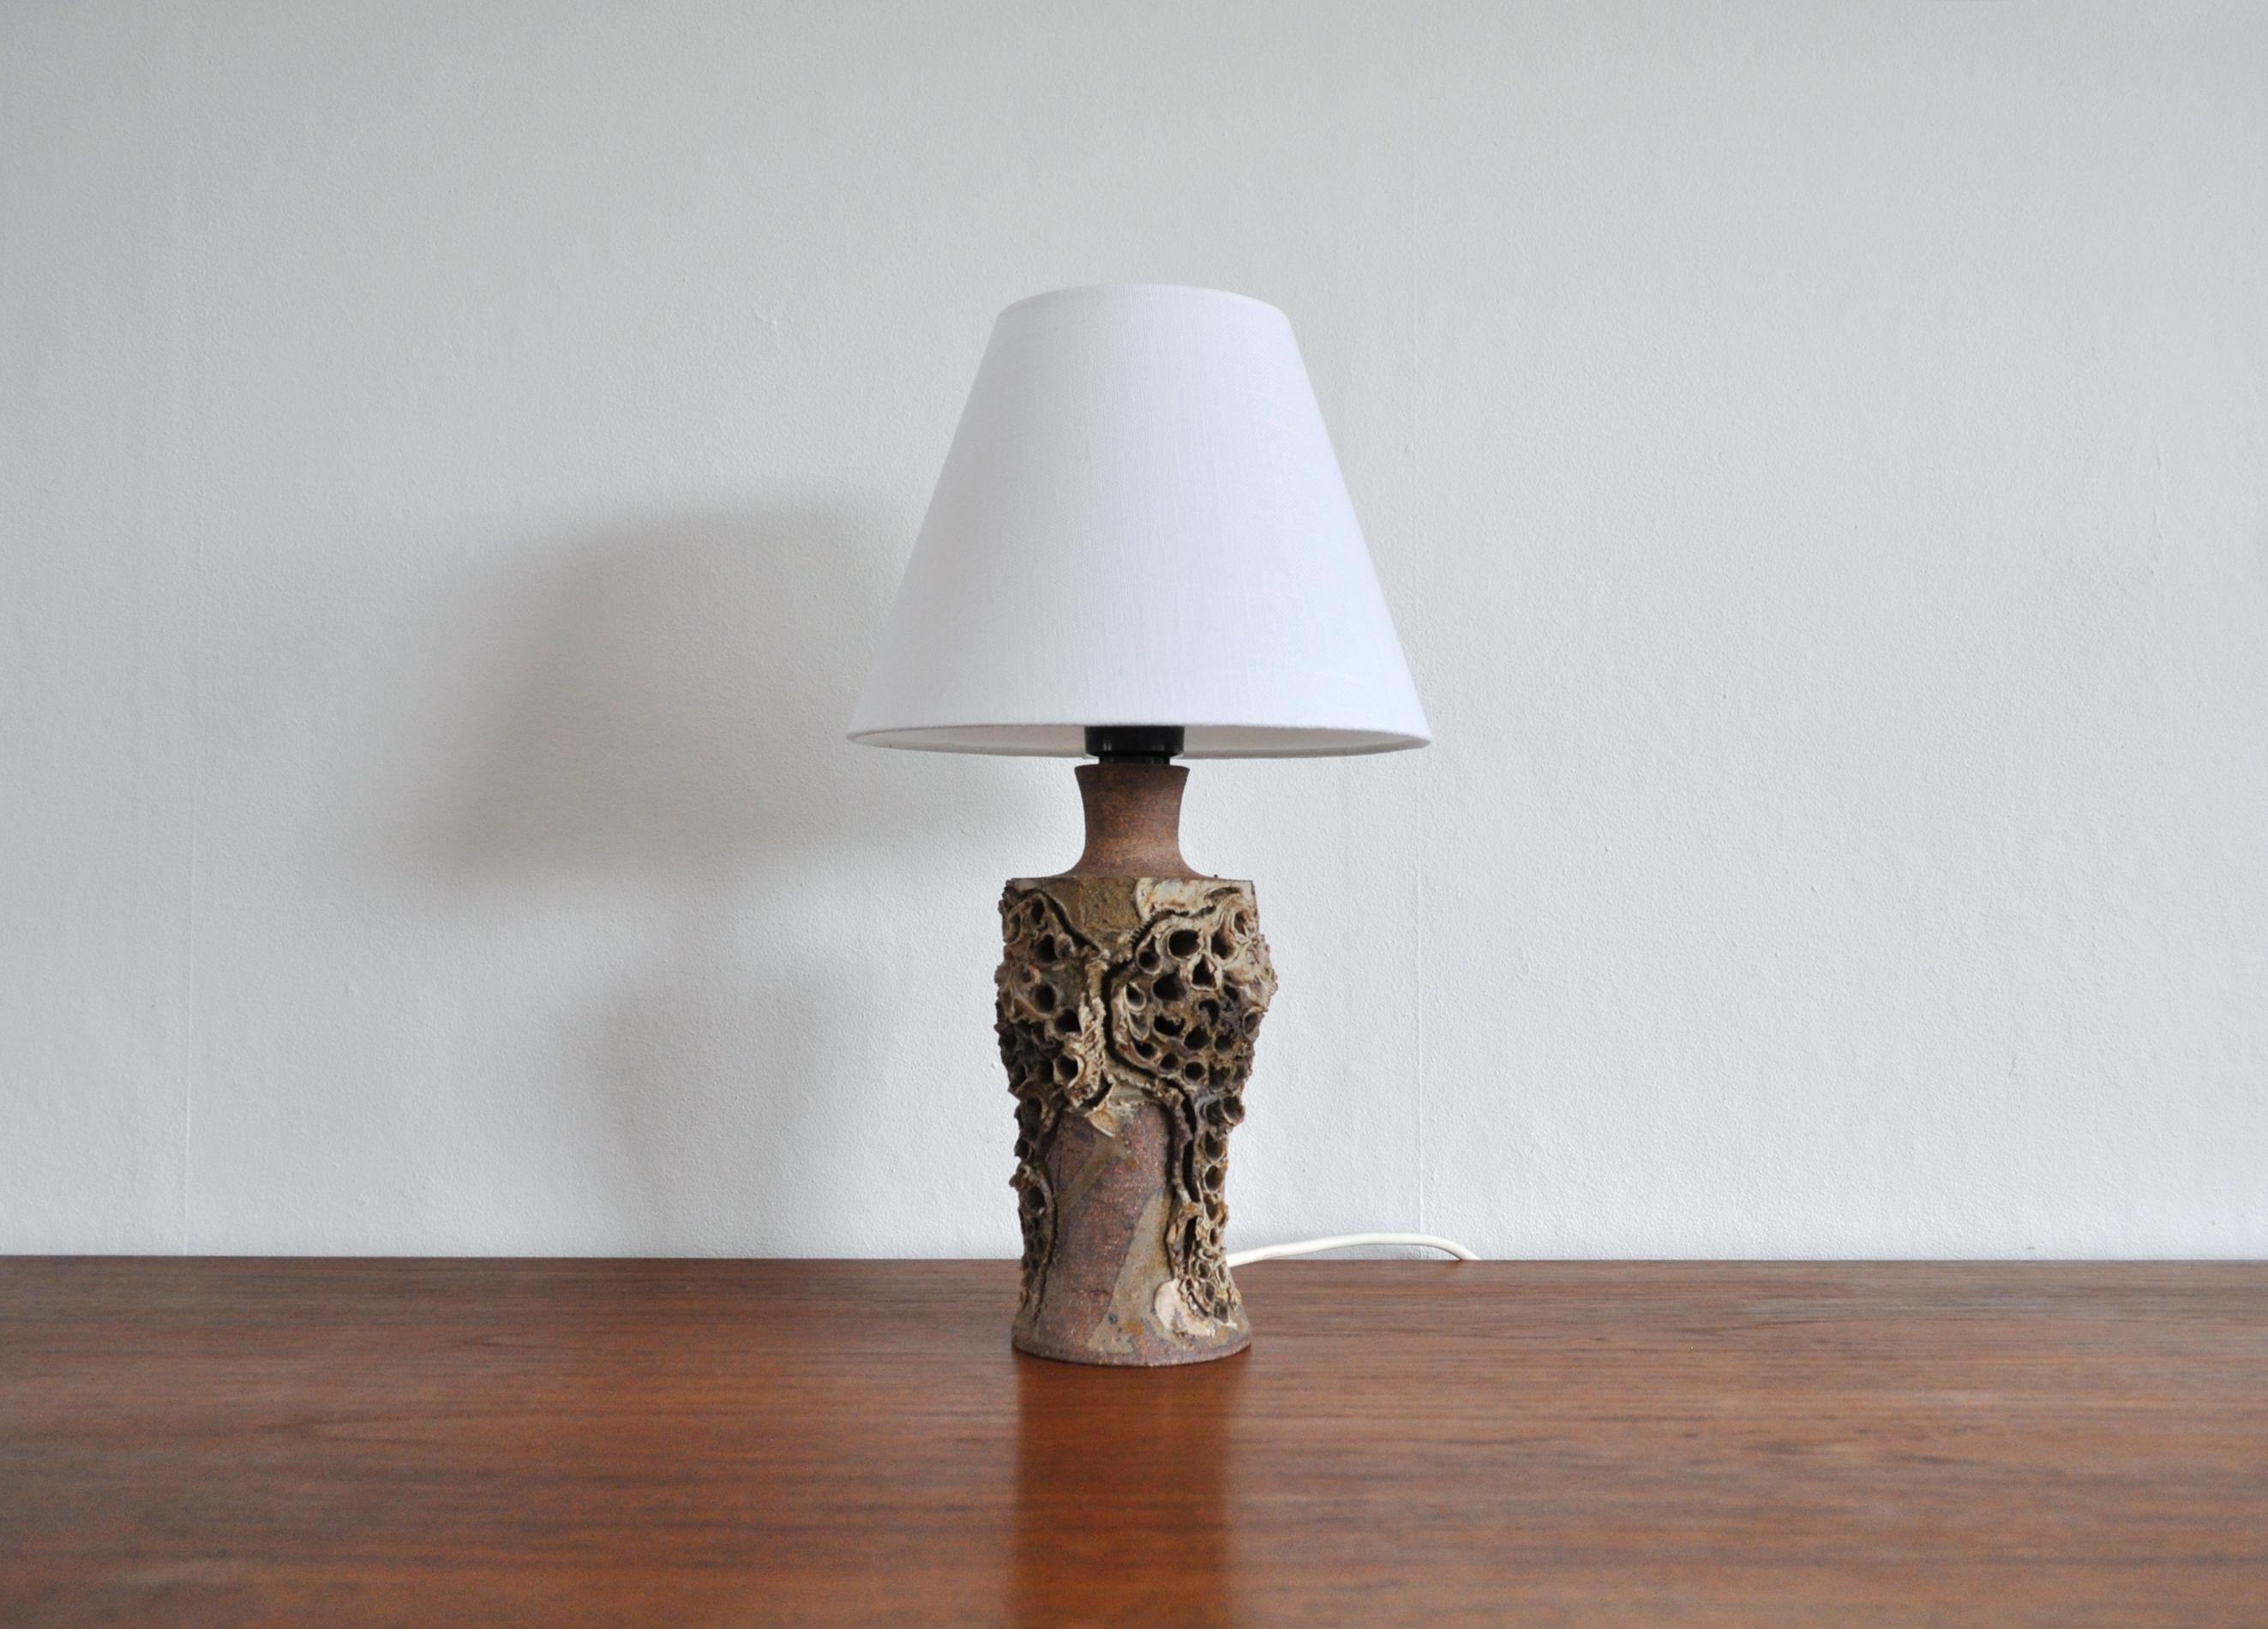 Unique handmade Danish Mid-Century Modern ceramic table lamp by Bodil Marie Nielsen. 
Height with shade 36 cm, height to socket 27 cm.
Shade dimensions H 15 cm x 10/20 cm.
Good vintage condition with small signs wear.
Light source: E27 Edison